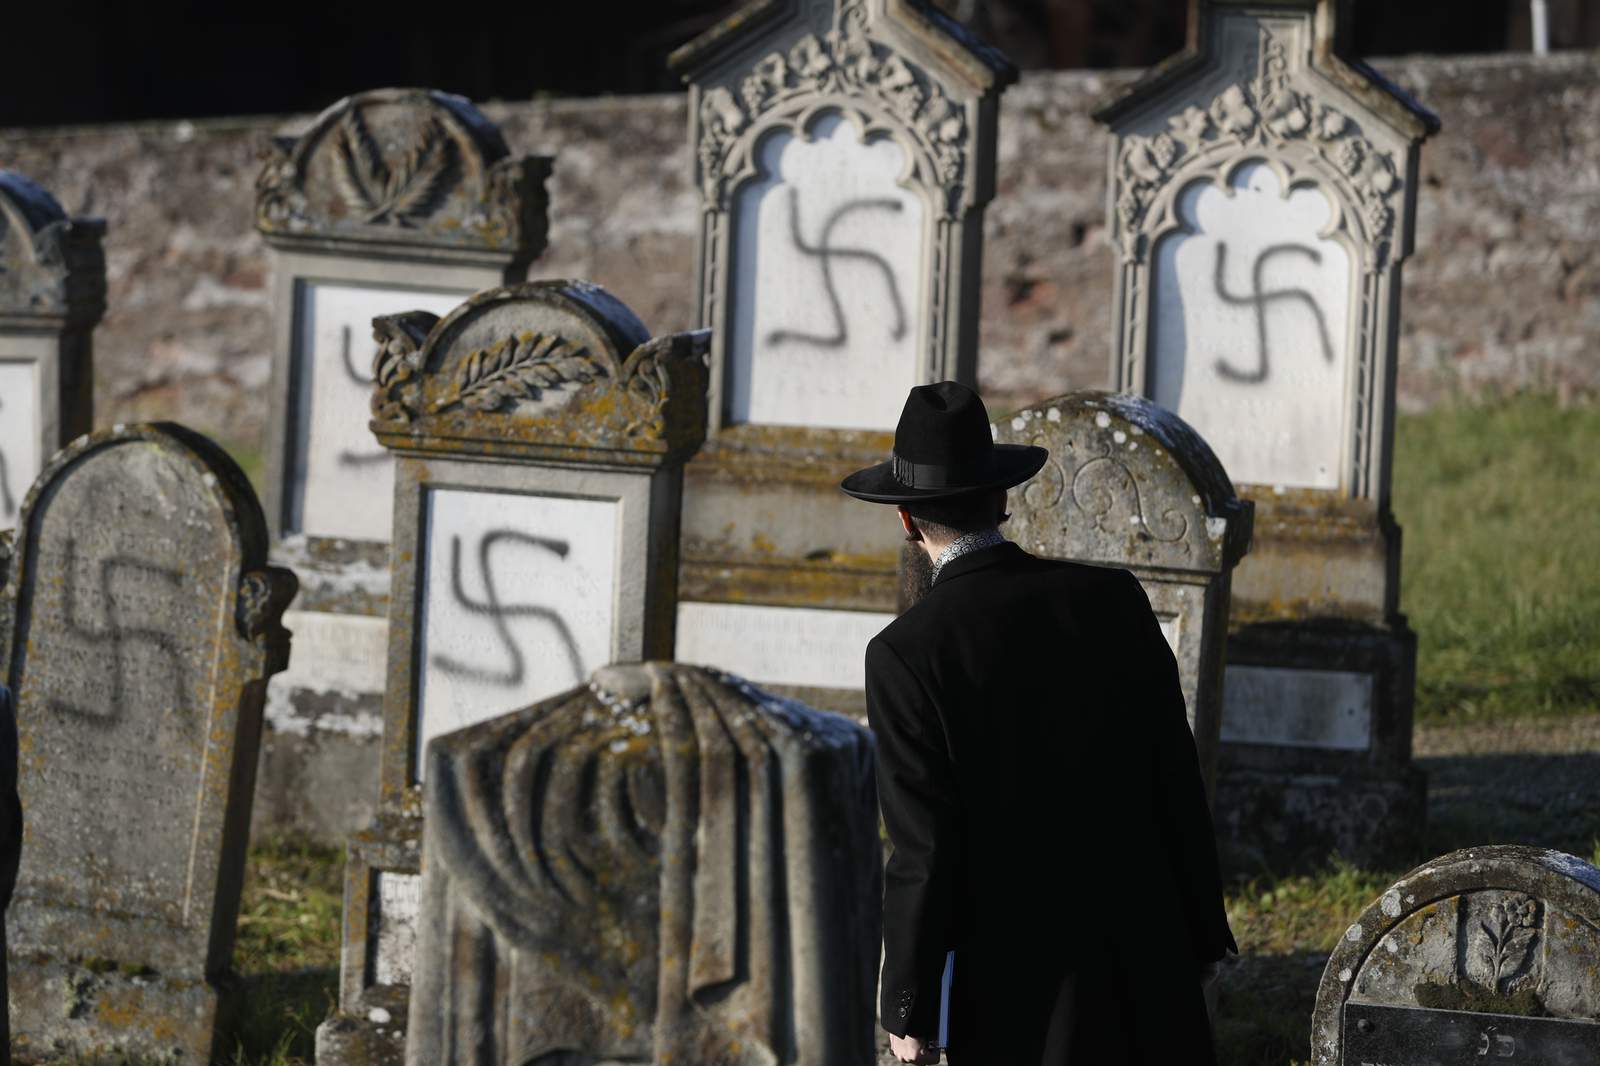 Report: Pandemic amped up anti-Semitism, forced it online